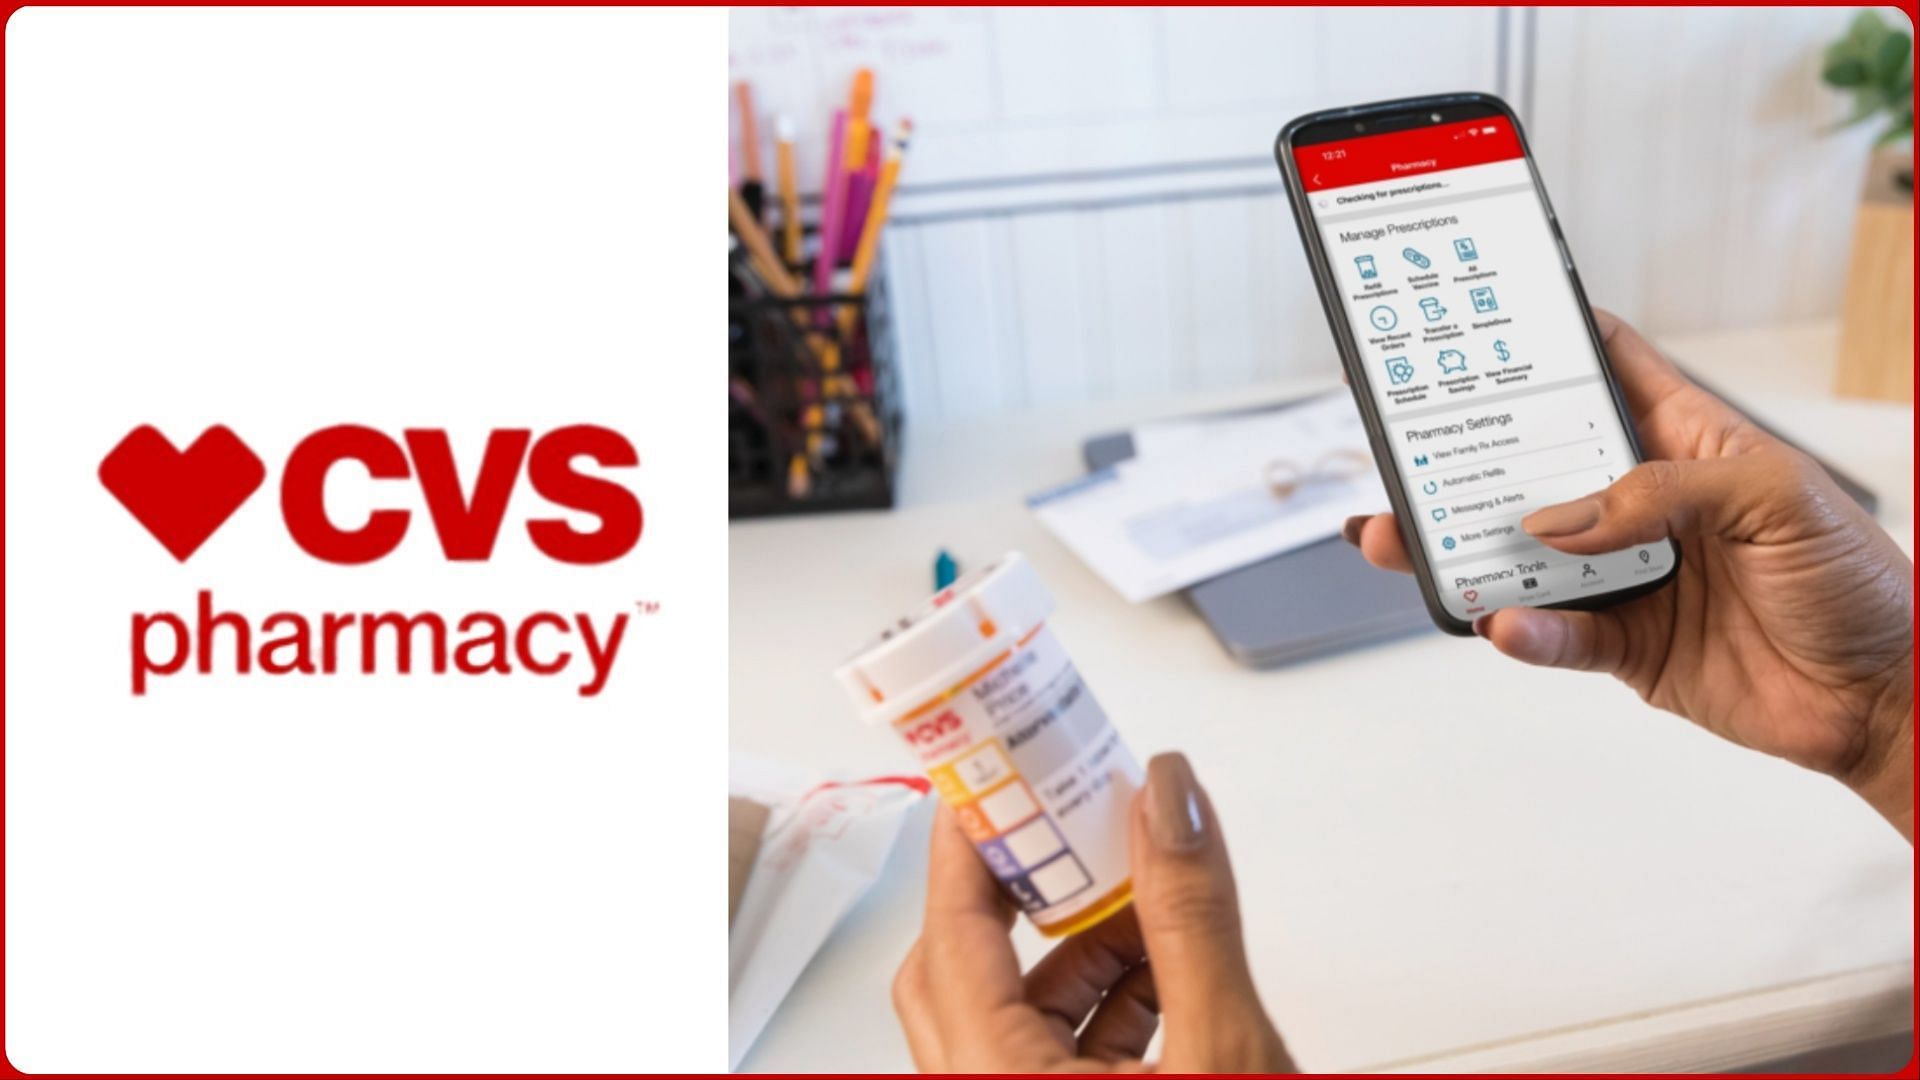 CVS Pharmacy continues shutting stores across the United States under new policy changes (Image via CVS Pharmacy)